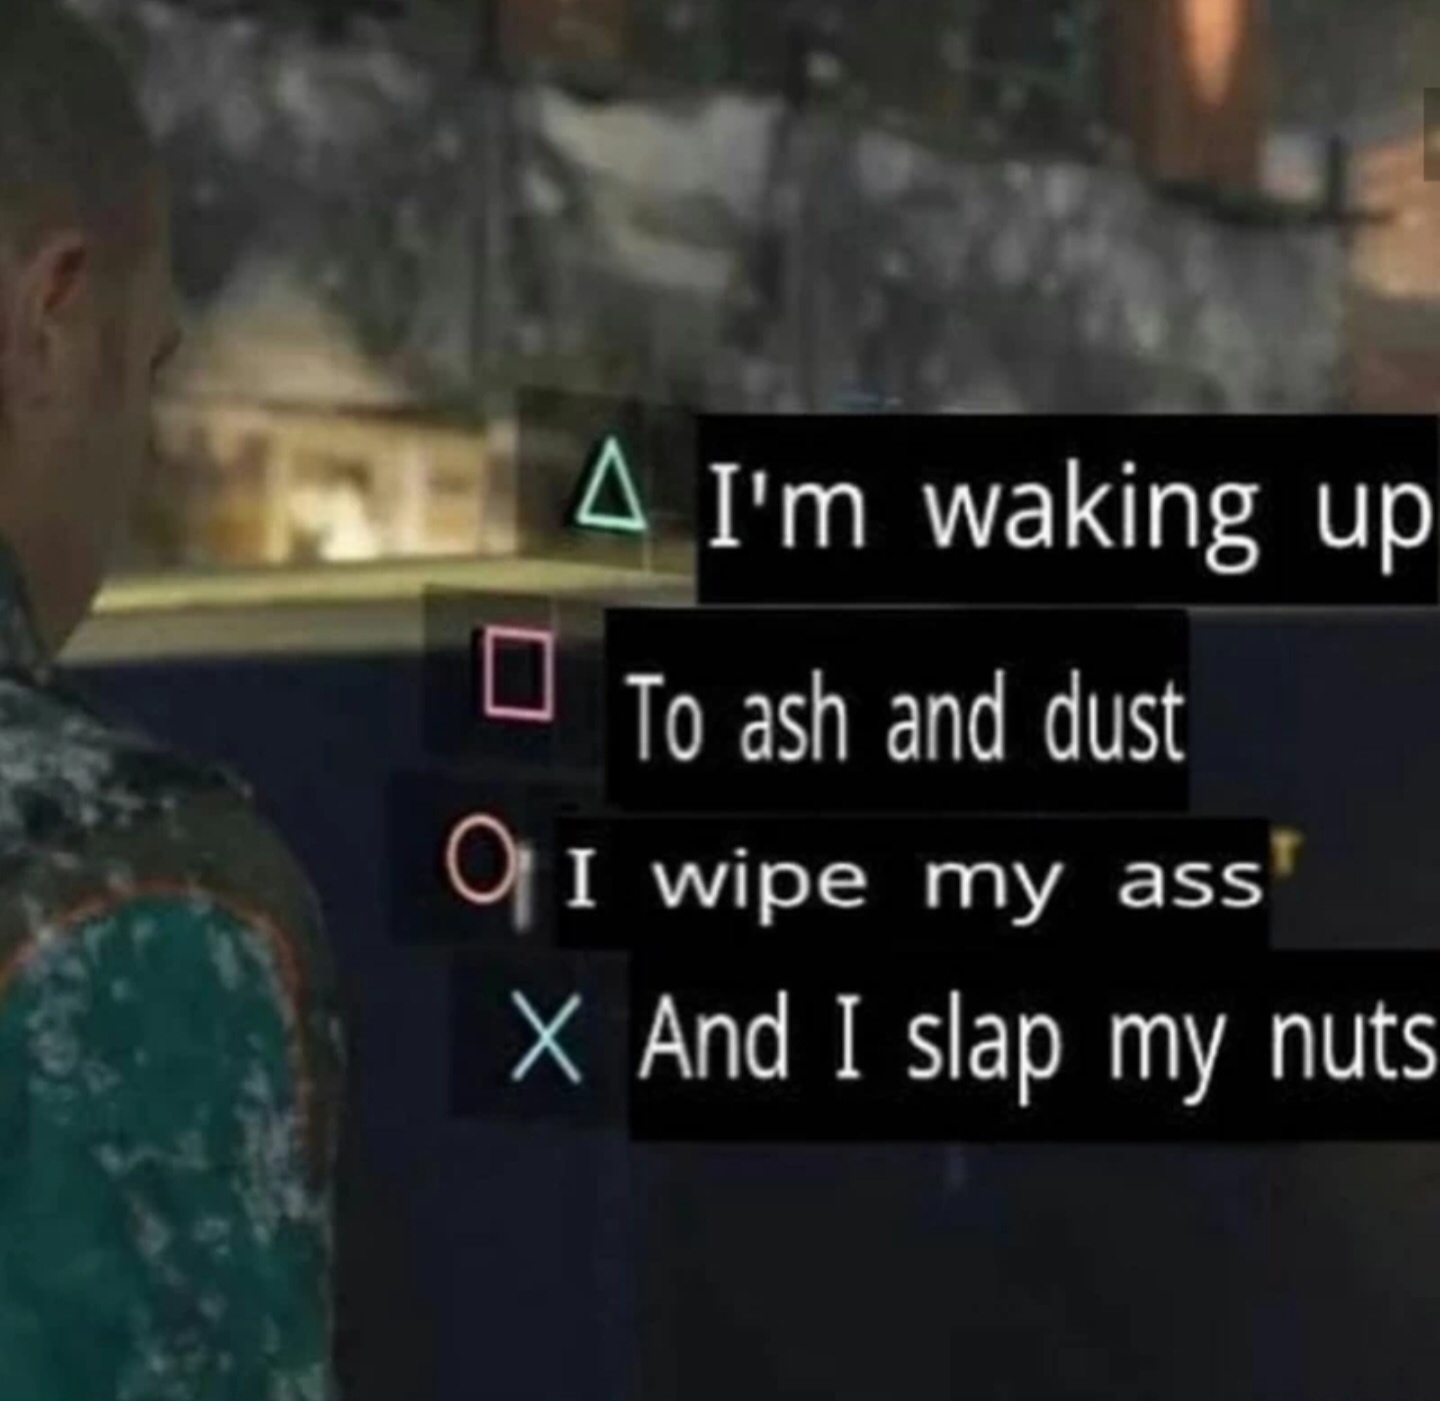 detroit become human i have a dream - 4 I'm waking up To ash and dust 01 wipe my ass X And I slap my nuts